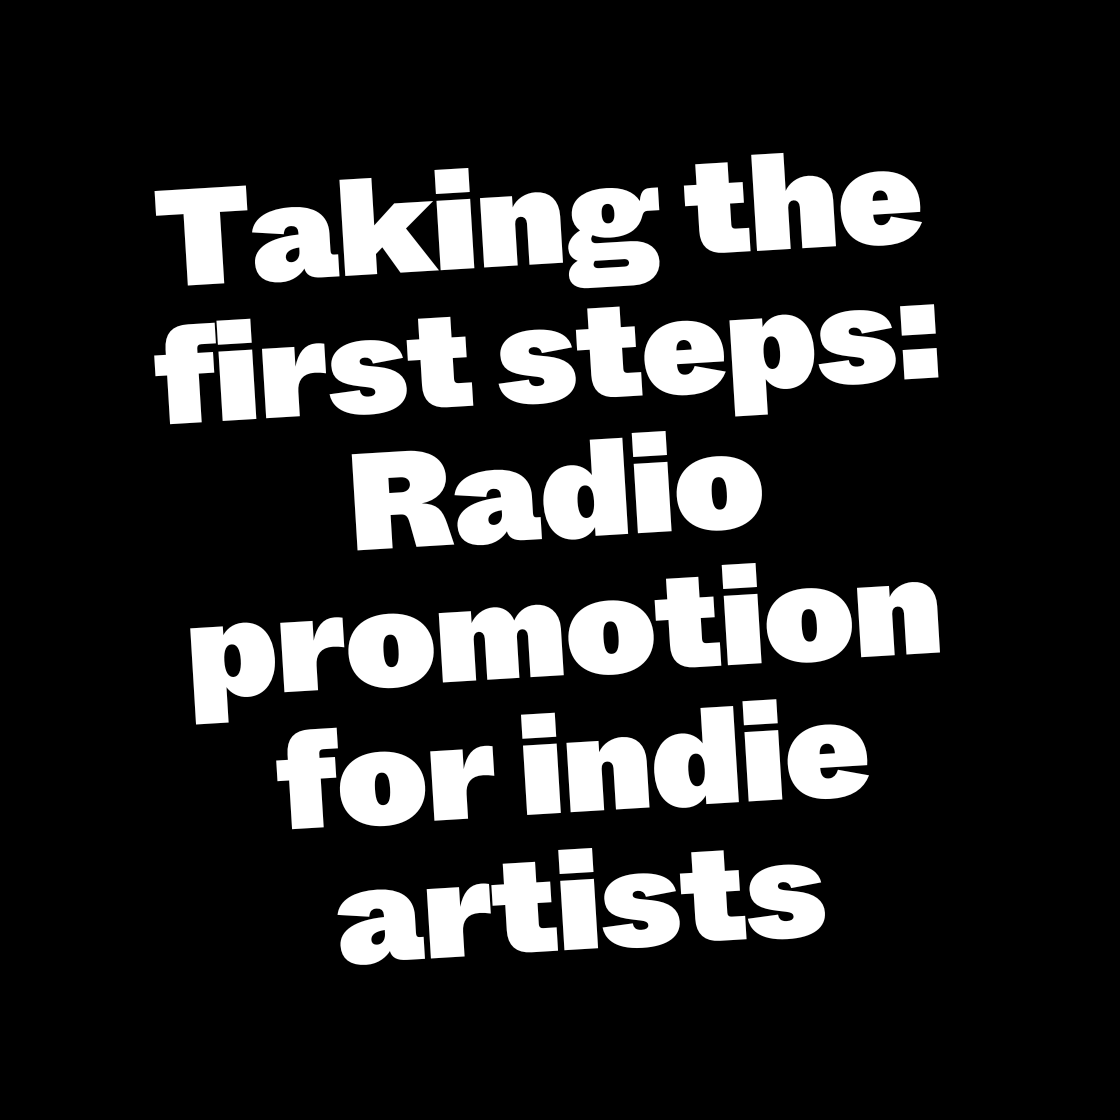 Taking the first steps: Radio promotion for indie artists